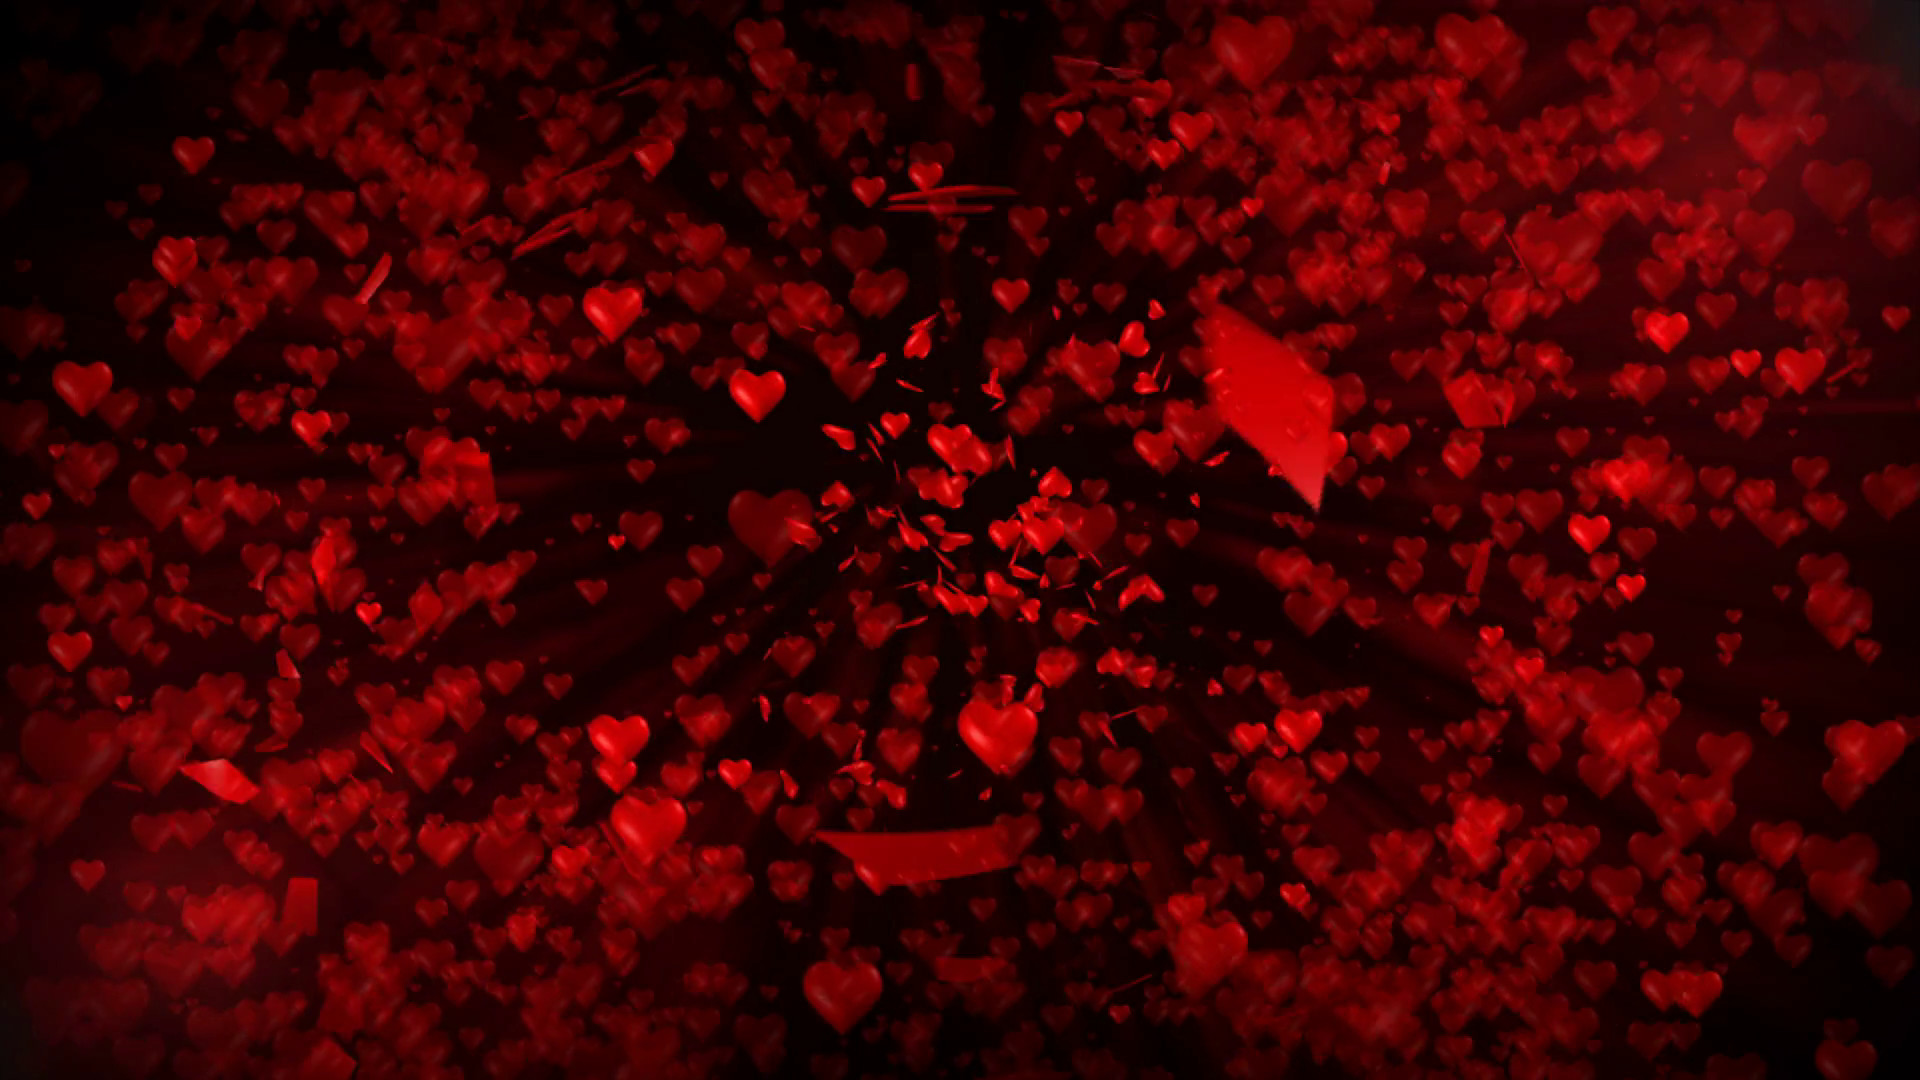 Subscription Library 3d animation of giant romantic red heart growing larger and burst into little red hearts pattern